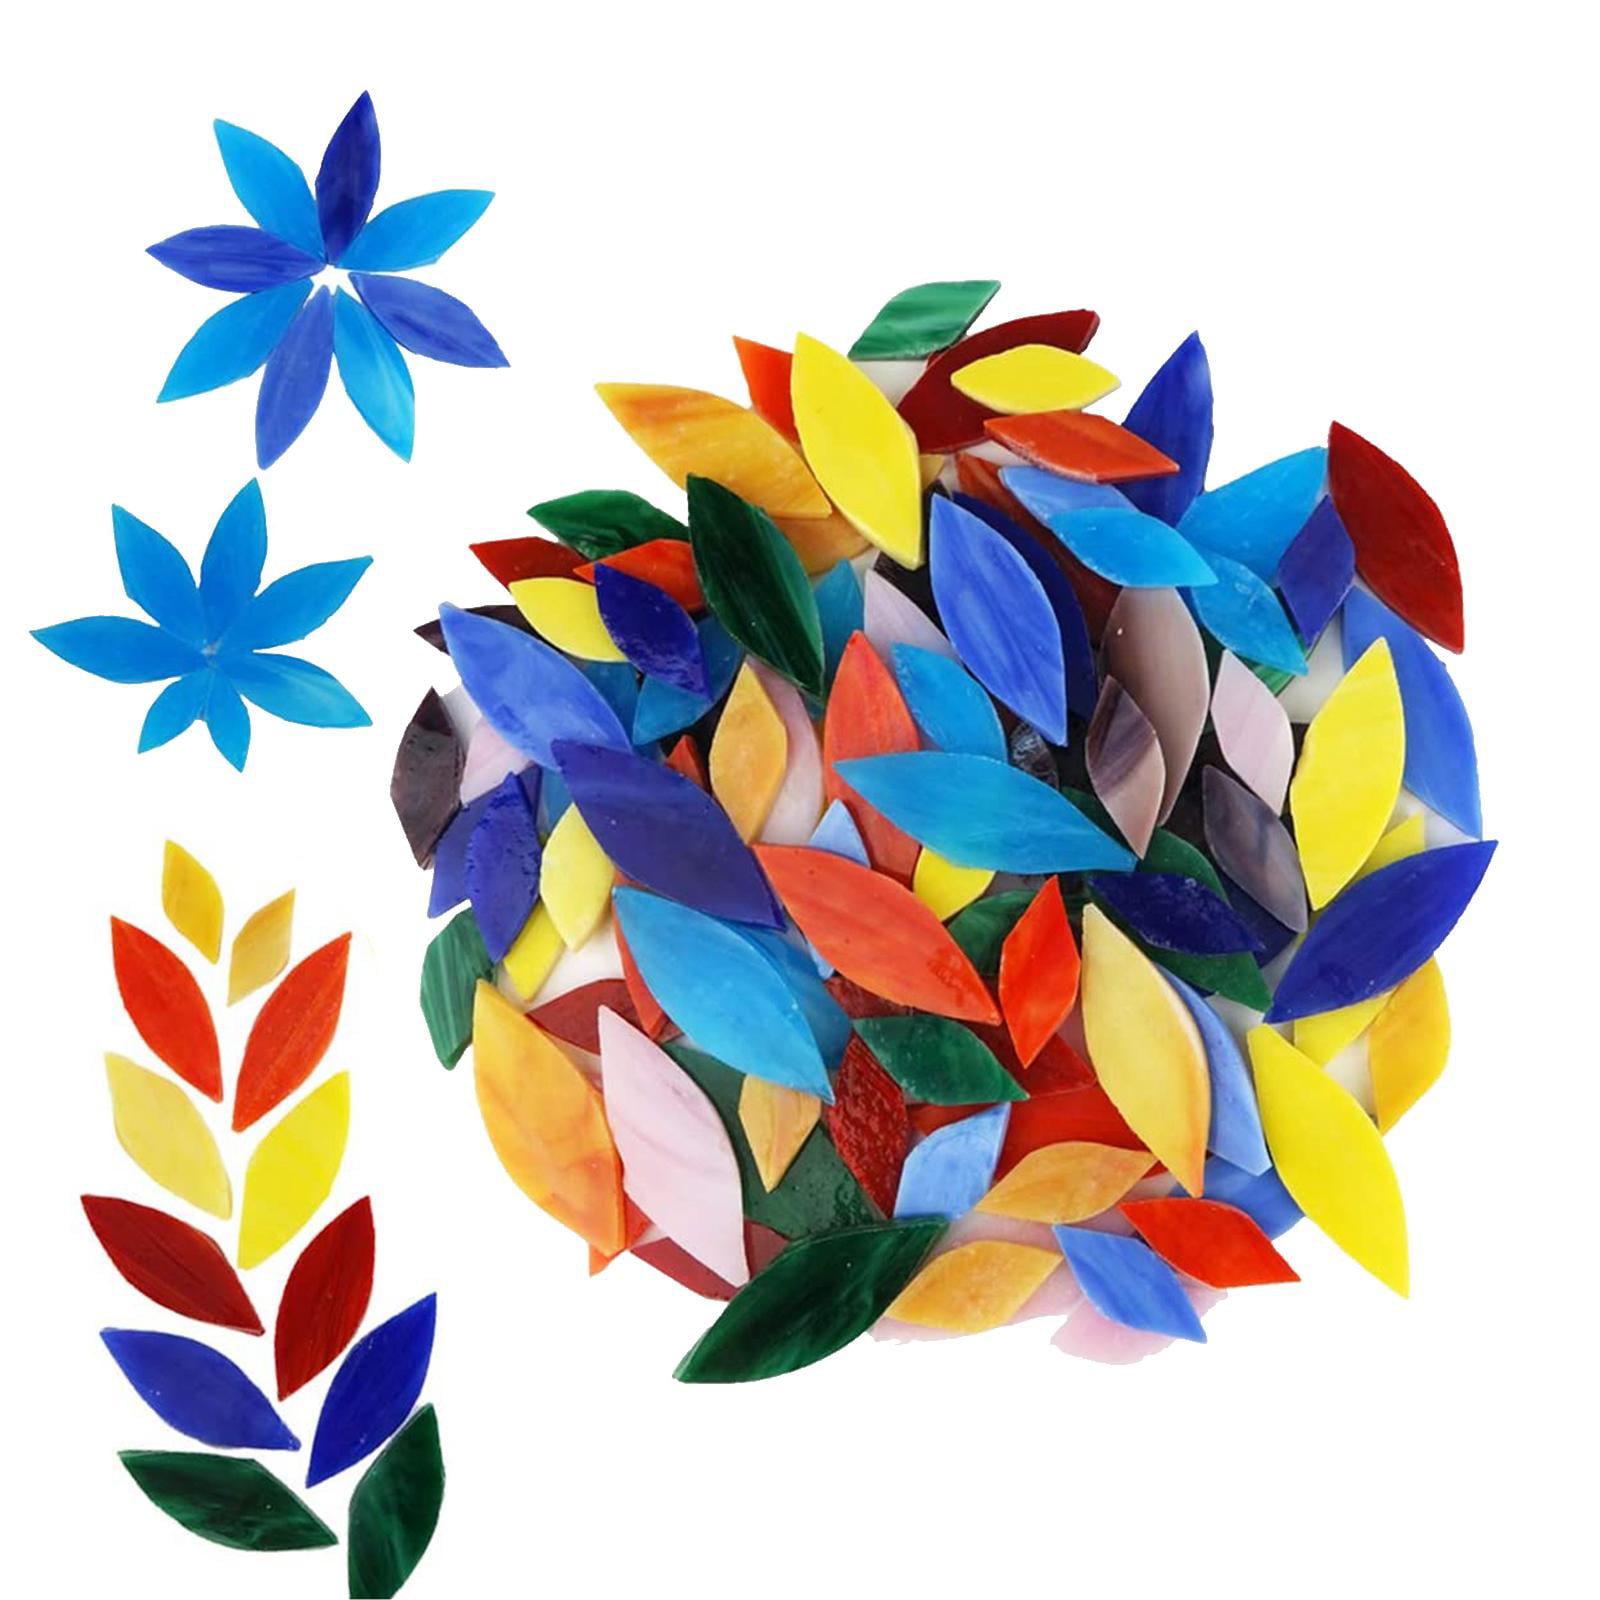 300pcs Mixed Colors Mosaic Tiles Flower Leaves Hand-Cut Stained Glass Art 